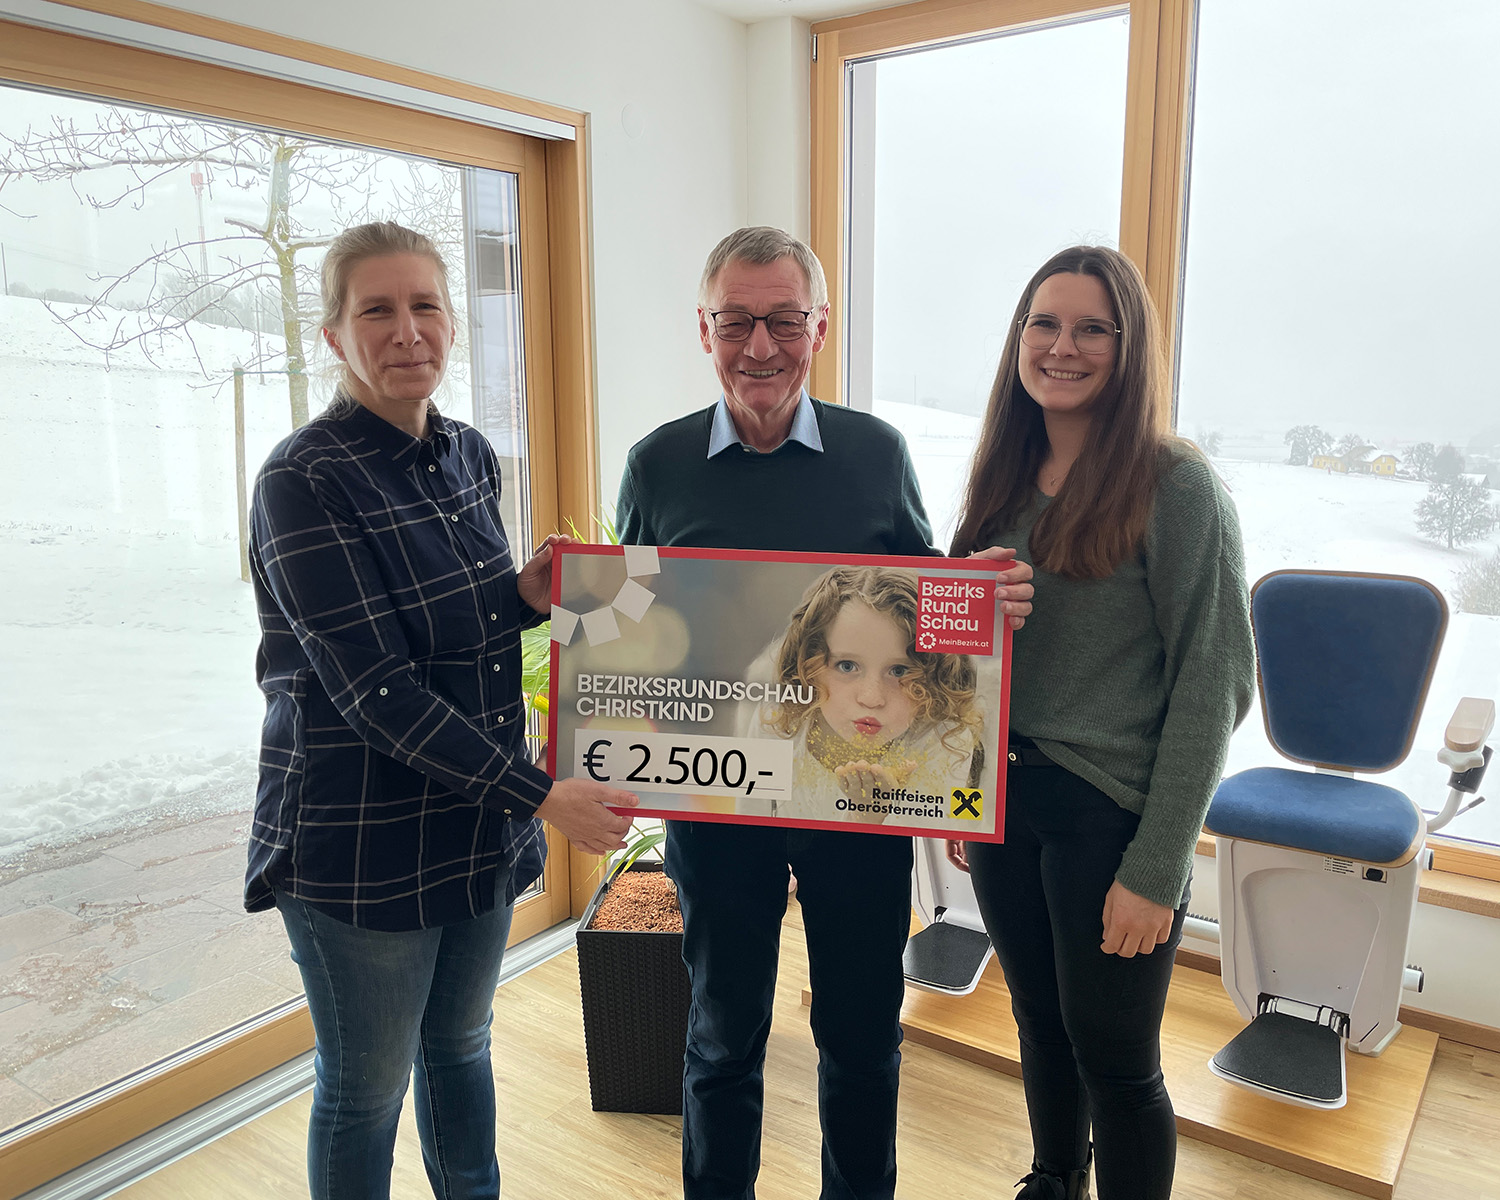 This year Lehner Lifttechnik has again donated for a good cause